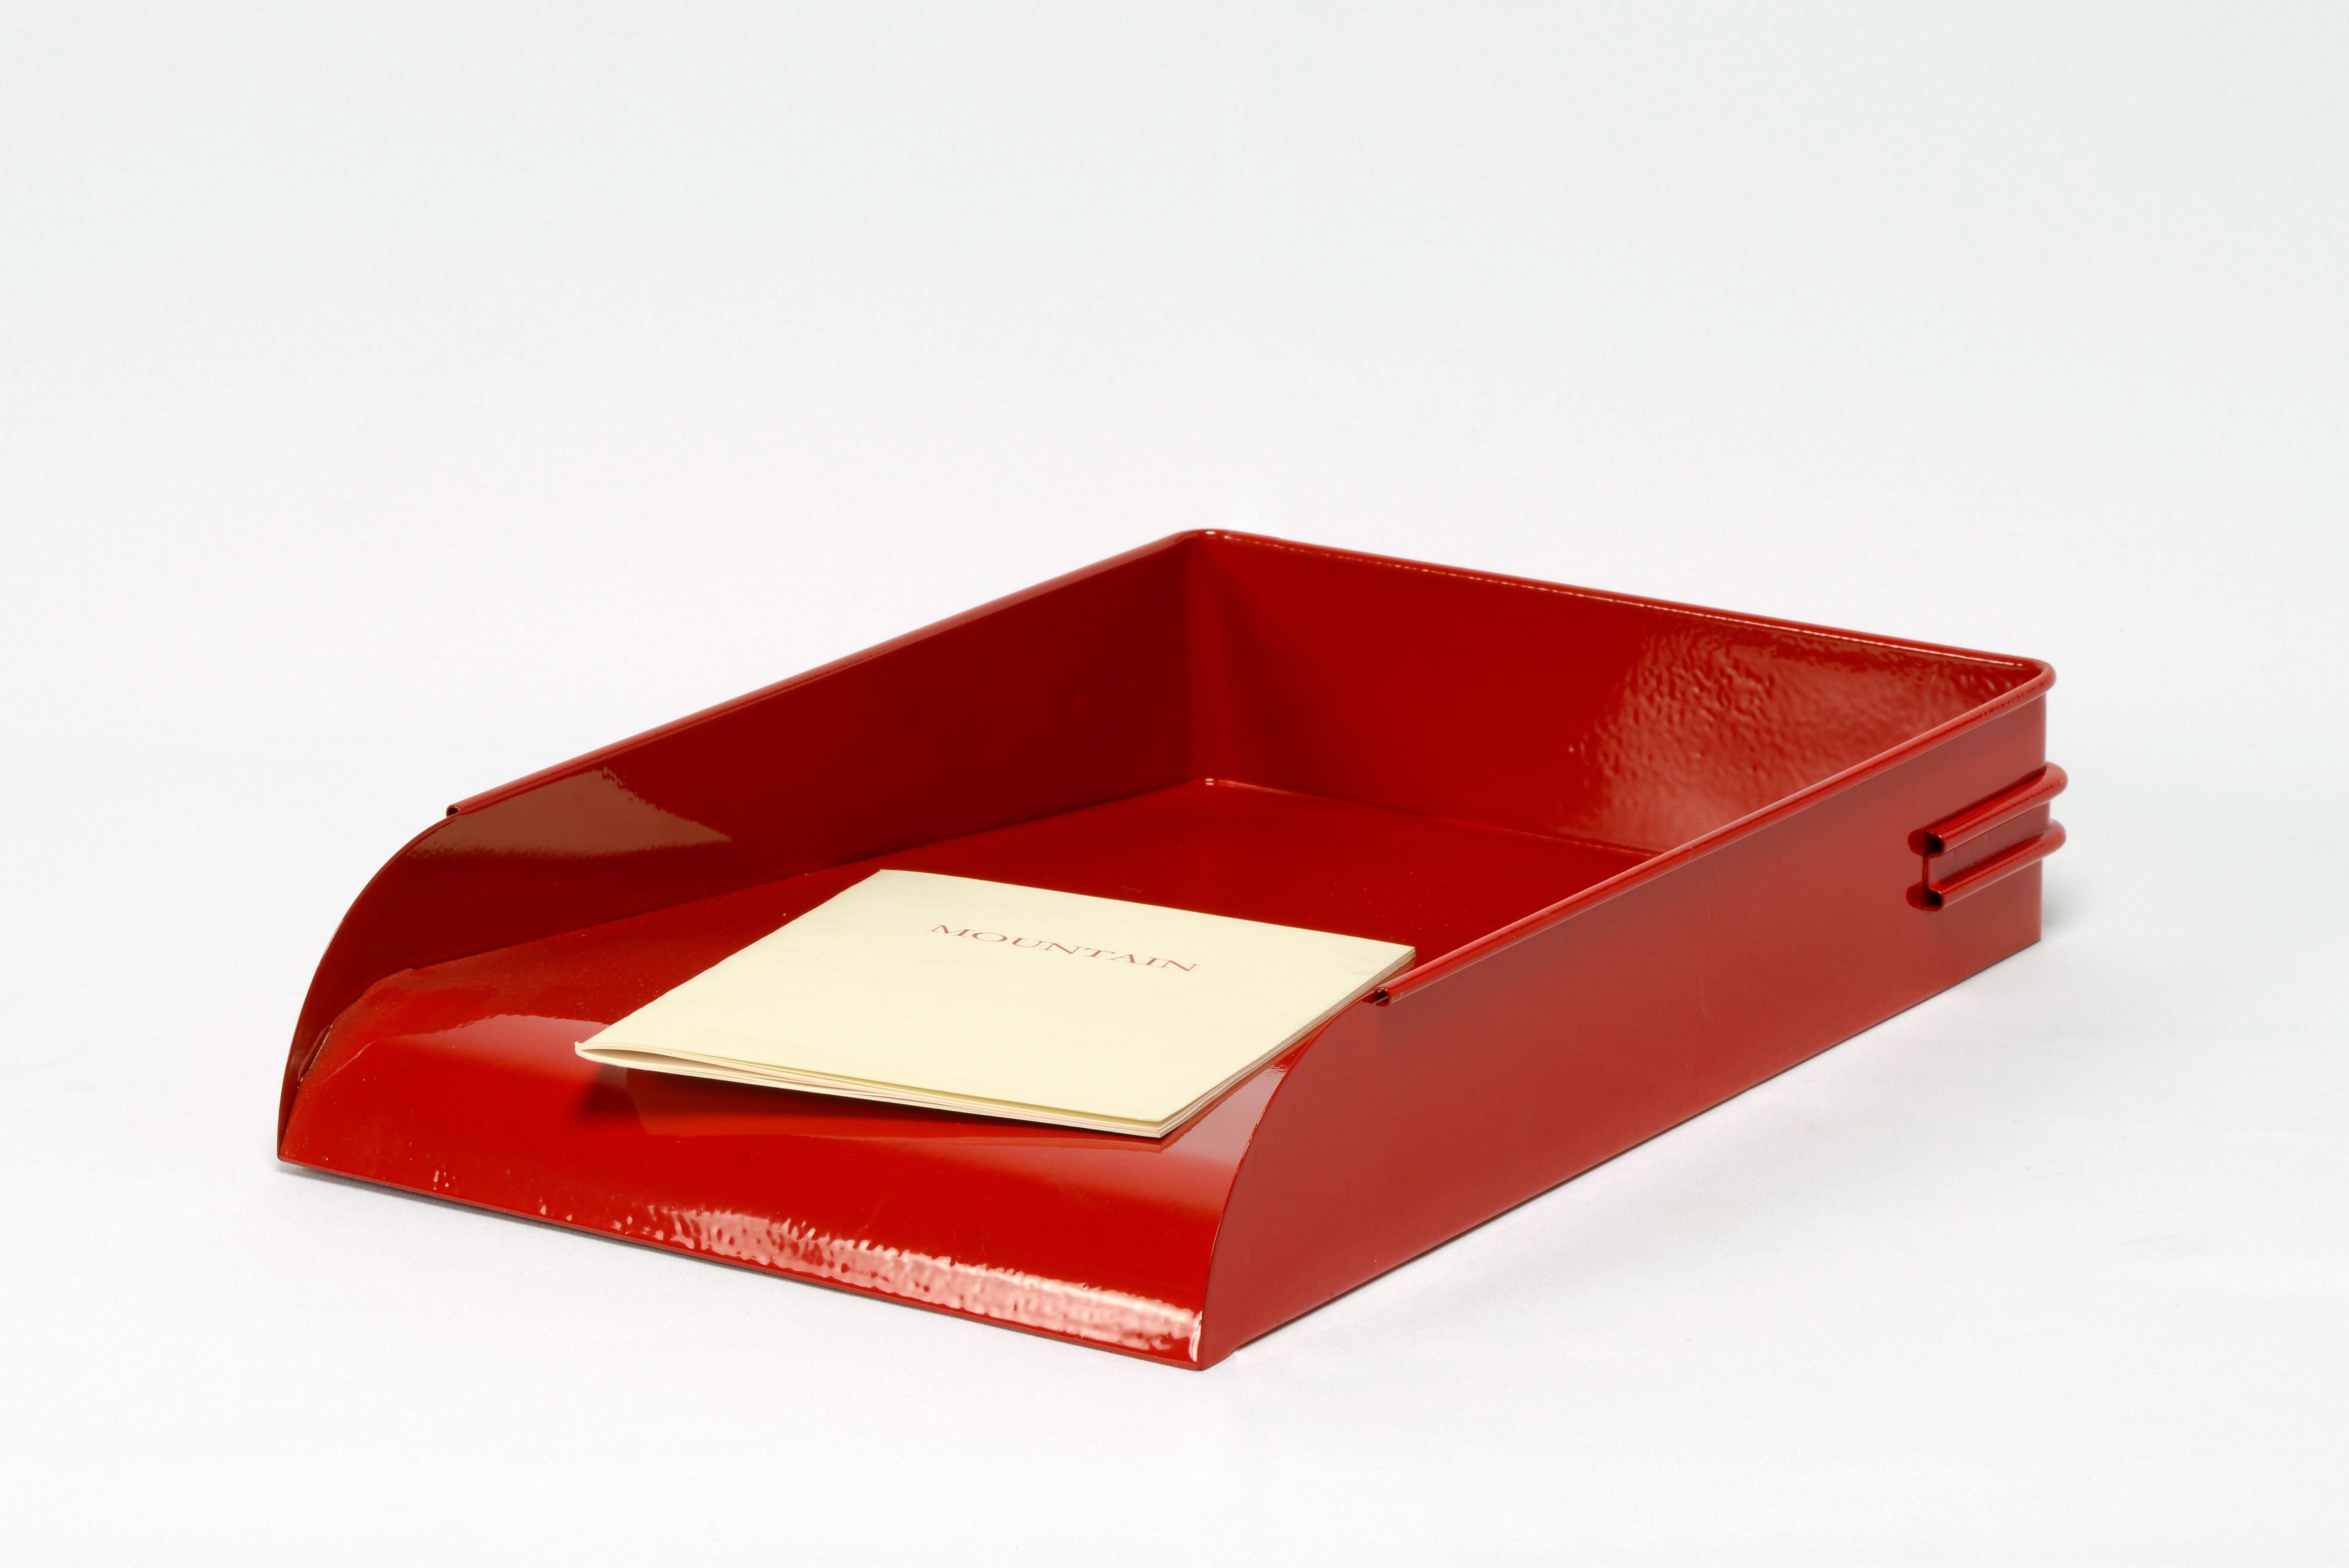 Art Deco 1930s Steel Letter Tray Refinished in Gloss Red